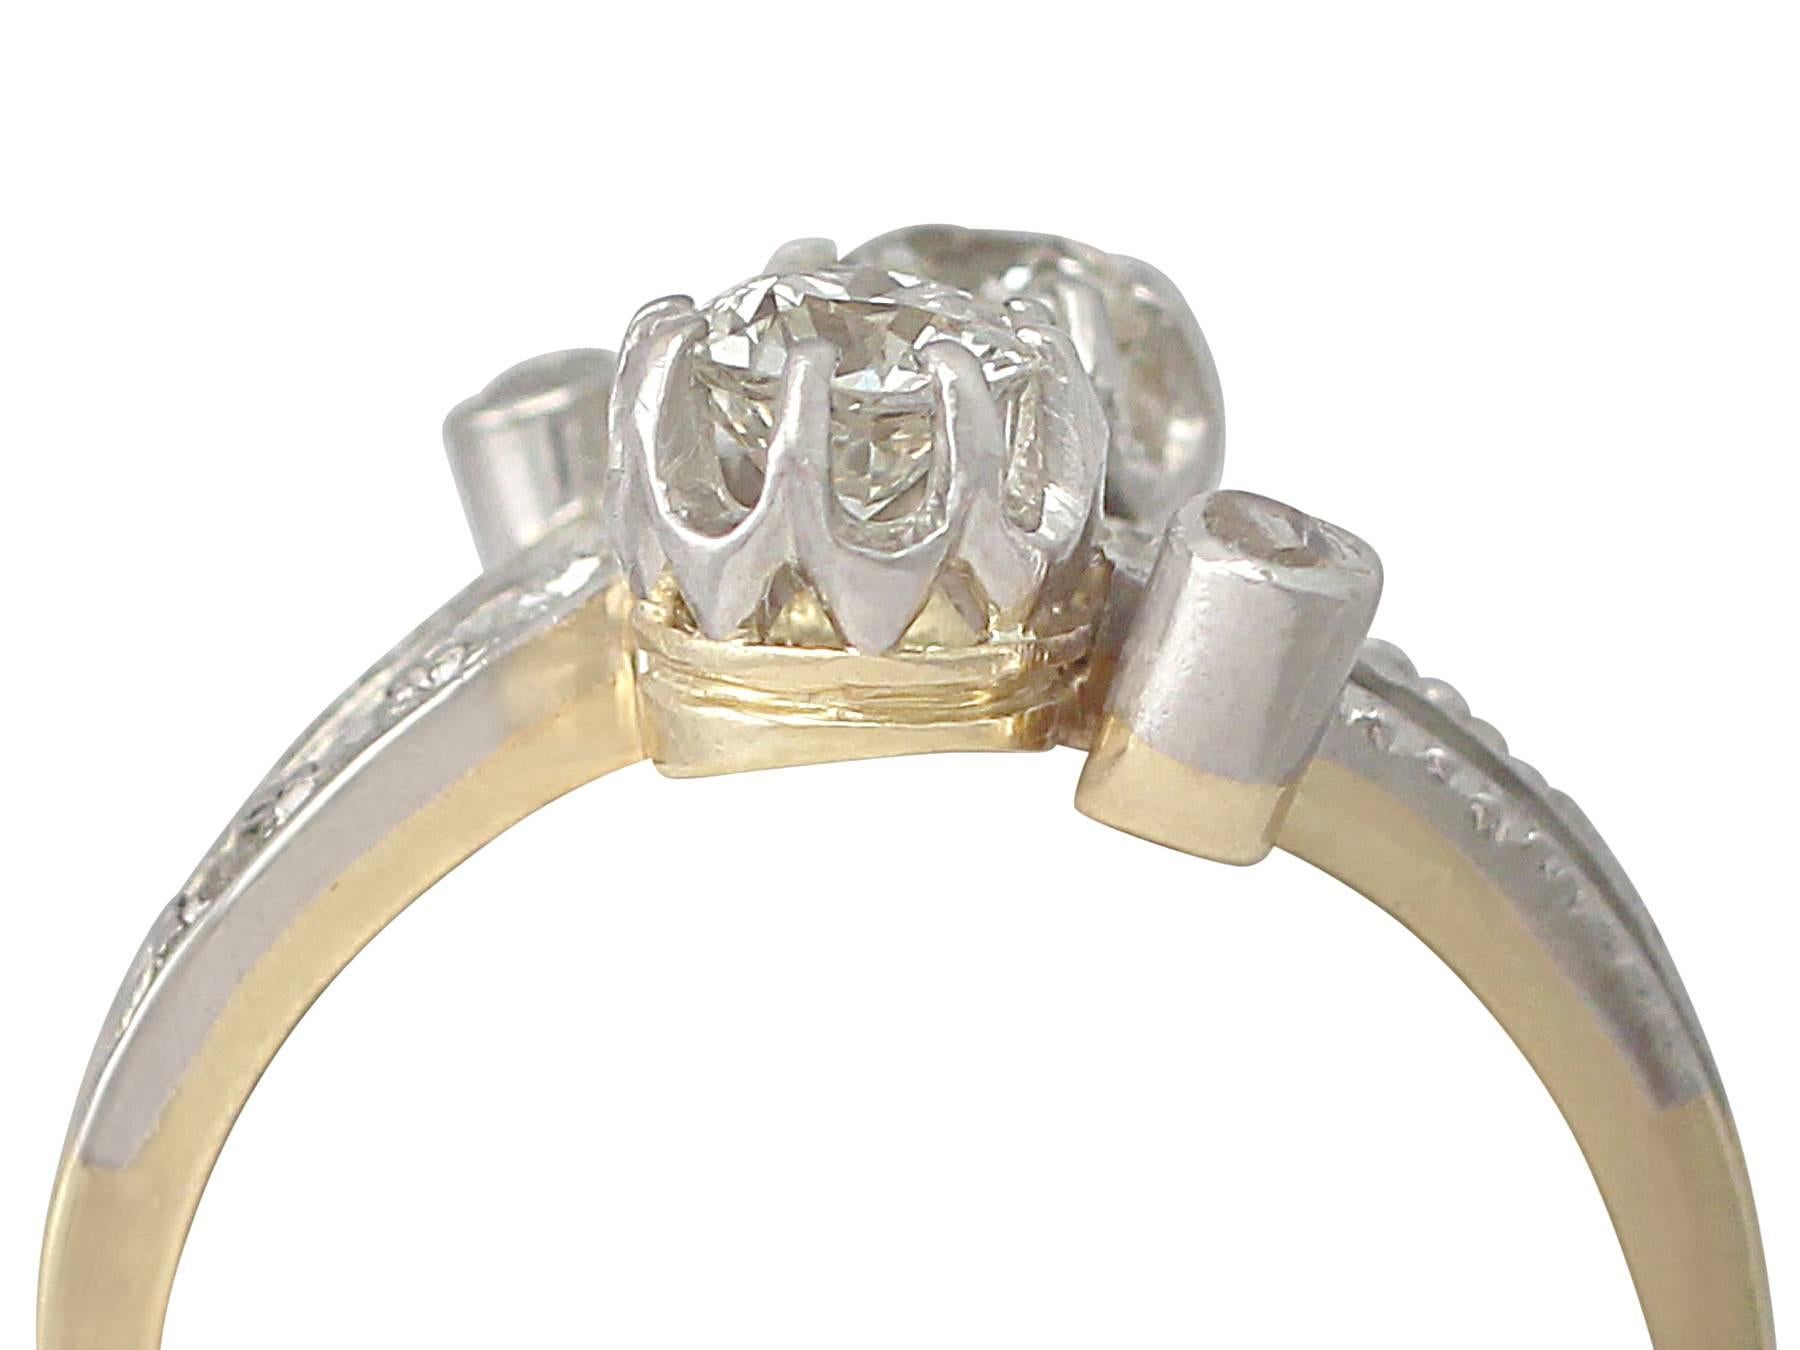 A fine and impressive 0.75 carat (total) diamond and 18 karat yellow gold, platinum set twist ring; part of our diverse antique jewelry and estate jewelry collections

This fine and impressive antique diamond twist ring has been crafted in 18k